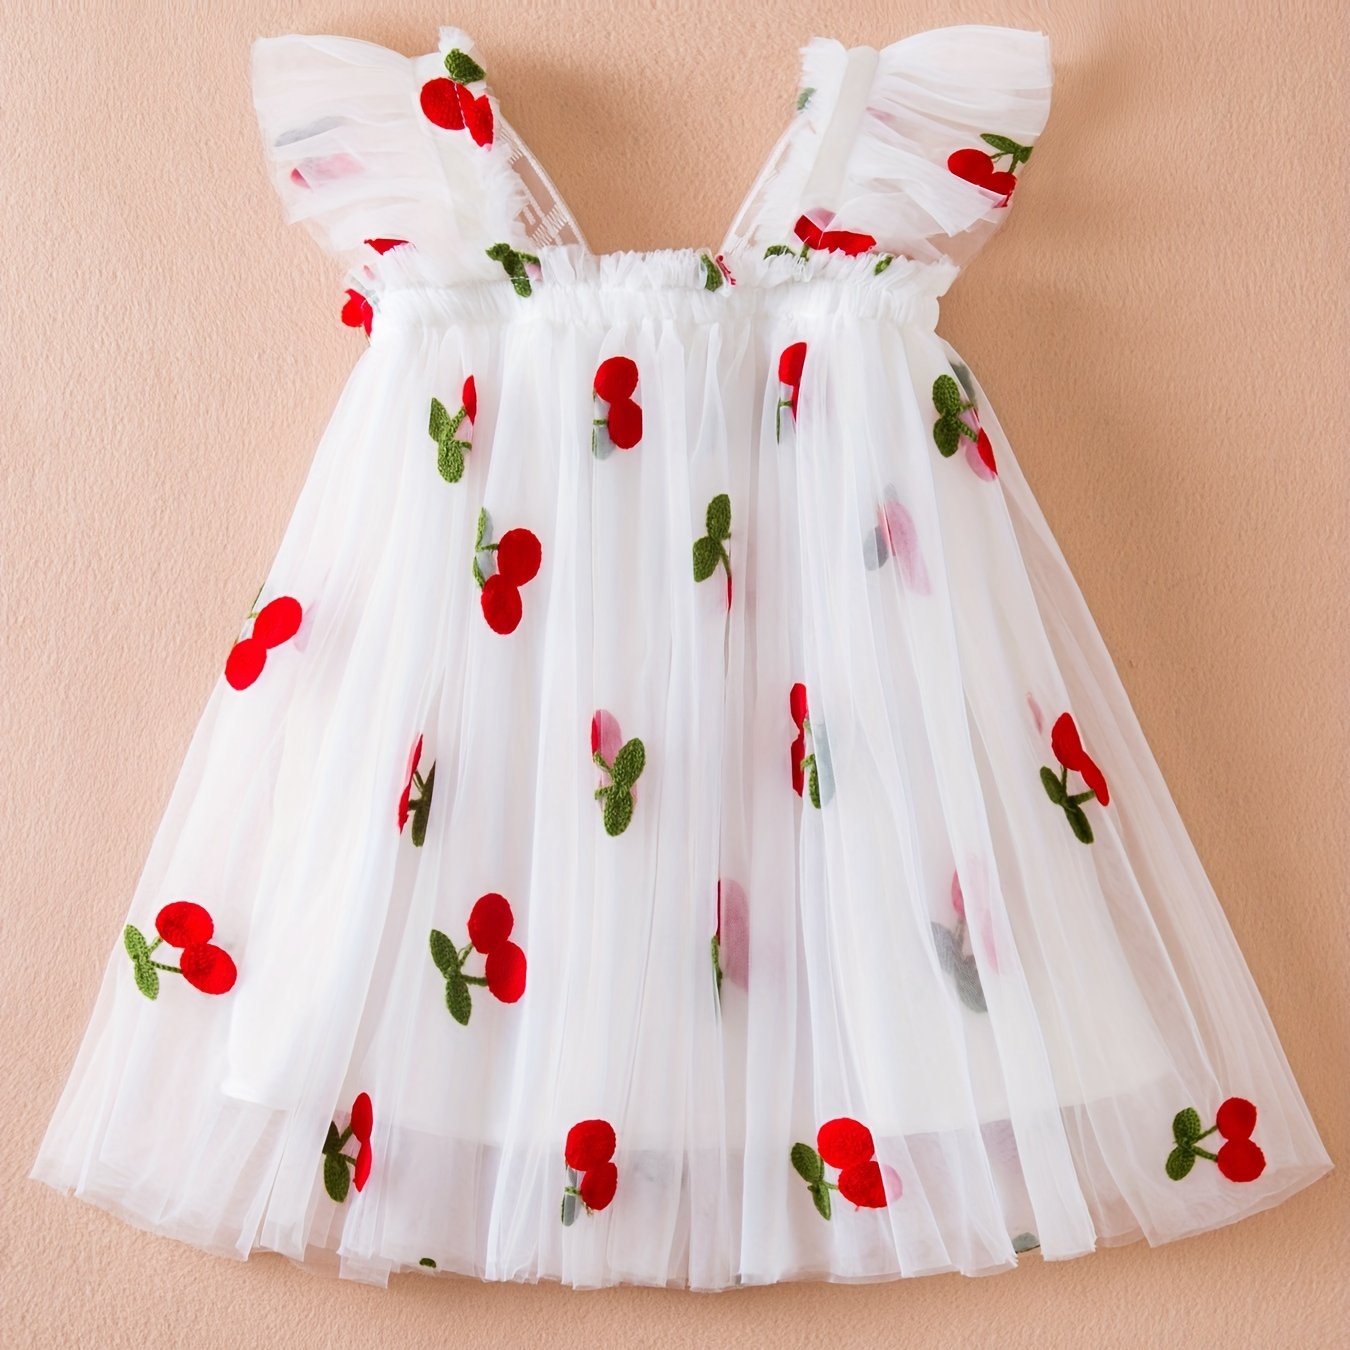 Silkberry Baby Girl Lace Dress - Sleeveless Bowknot Summer Gown With  Headband